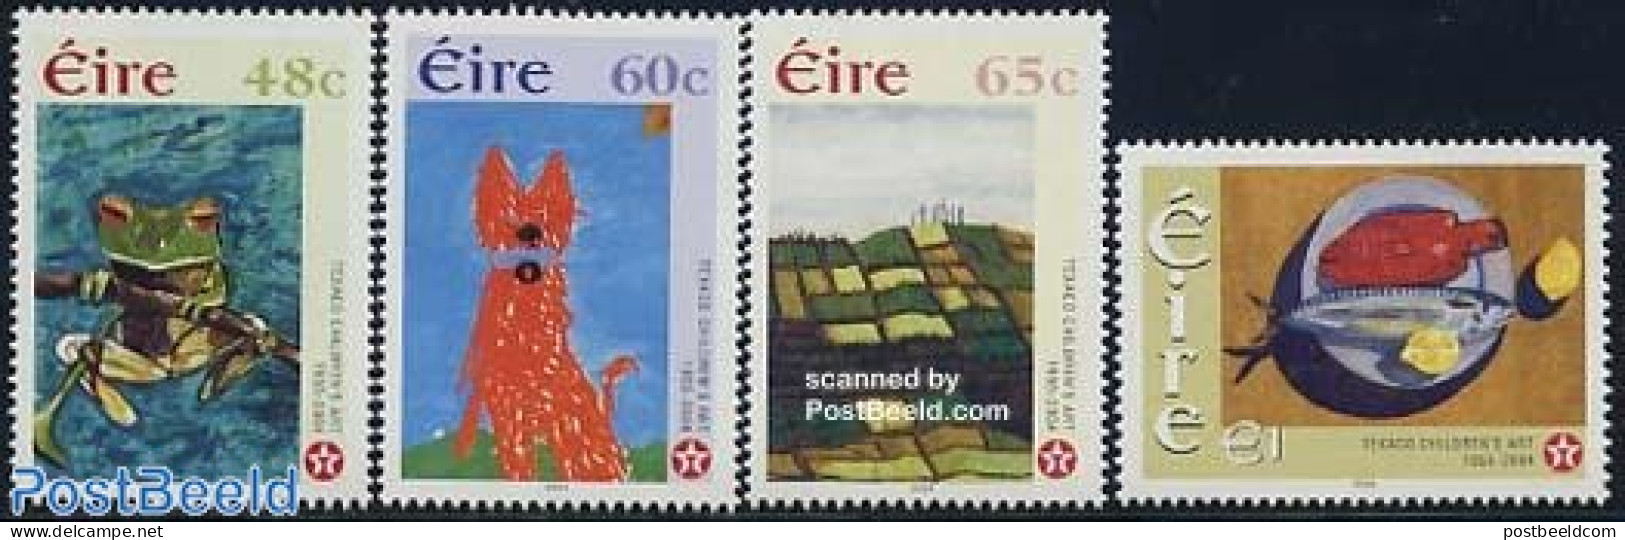 Ireland 2004 Texaco Childrens Art 4v, Mint NH, Nature - Dogs - Fish - Frogs & Toads - Art - Children Drawings - Unused Stamps